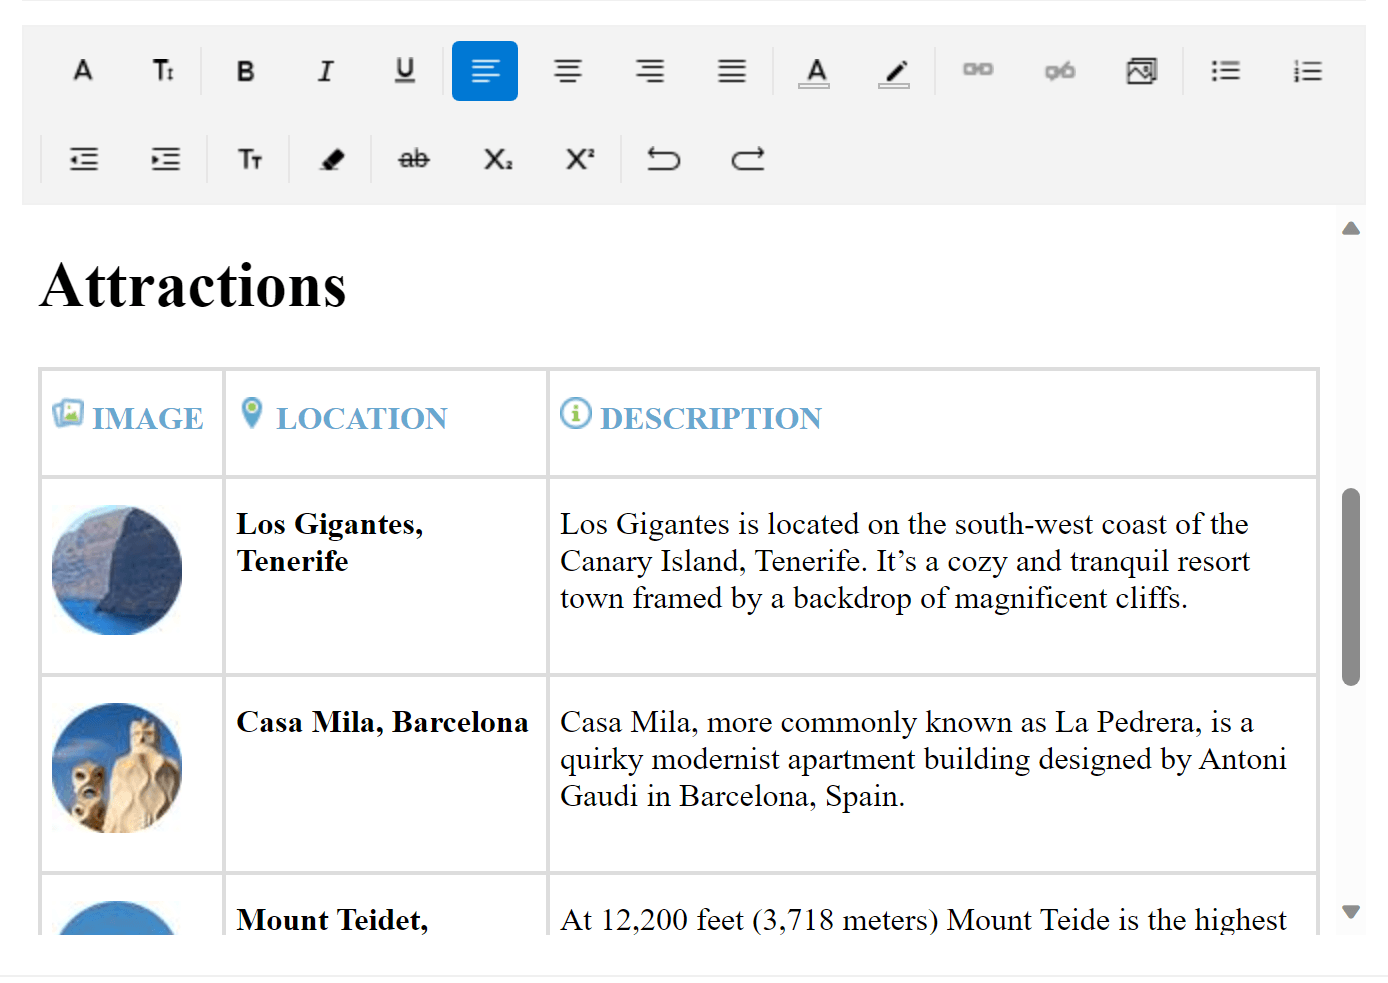 Inside a WYSIWYG editor is a table of attractions, with images, locations, descriptions, and stylized text